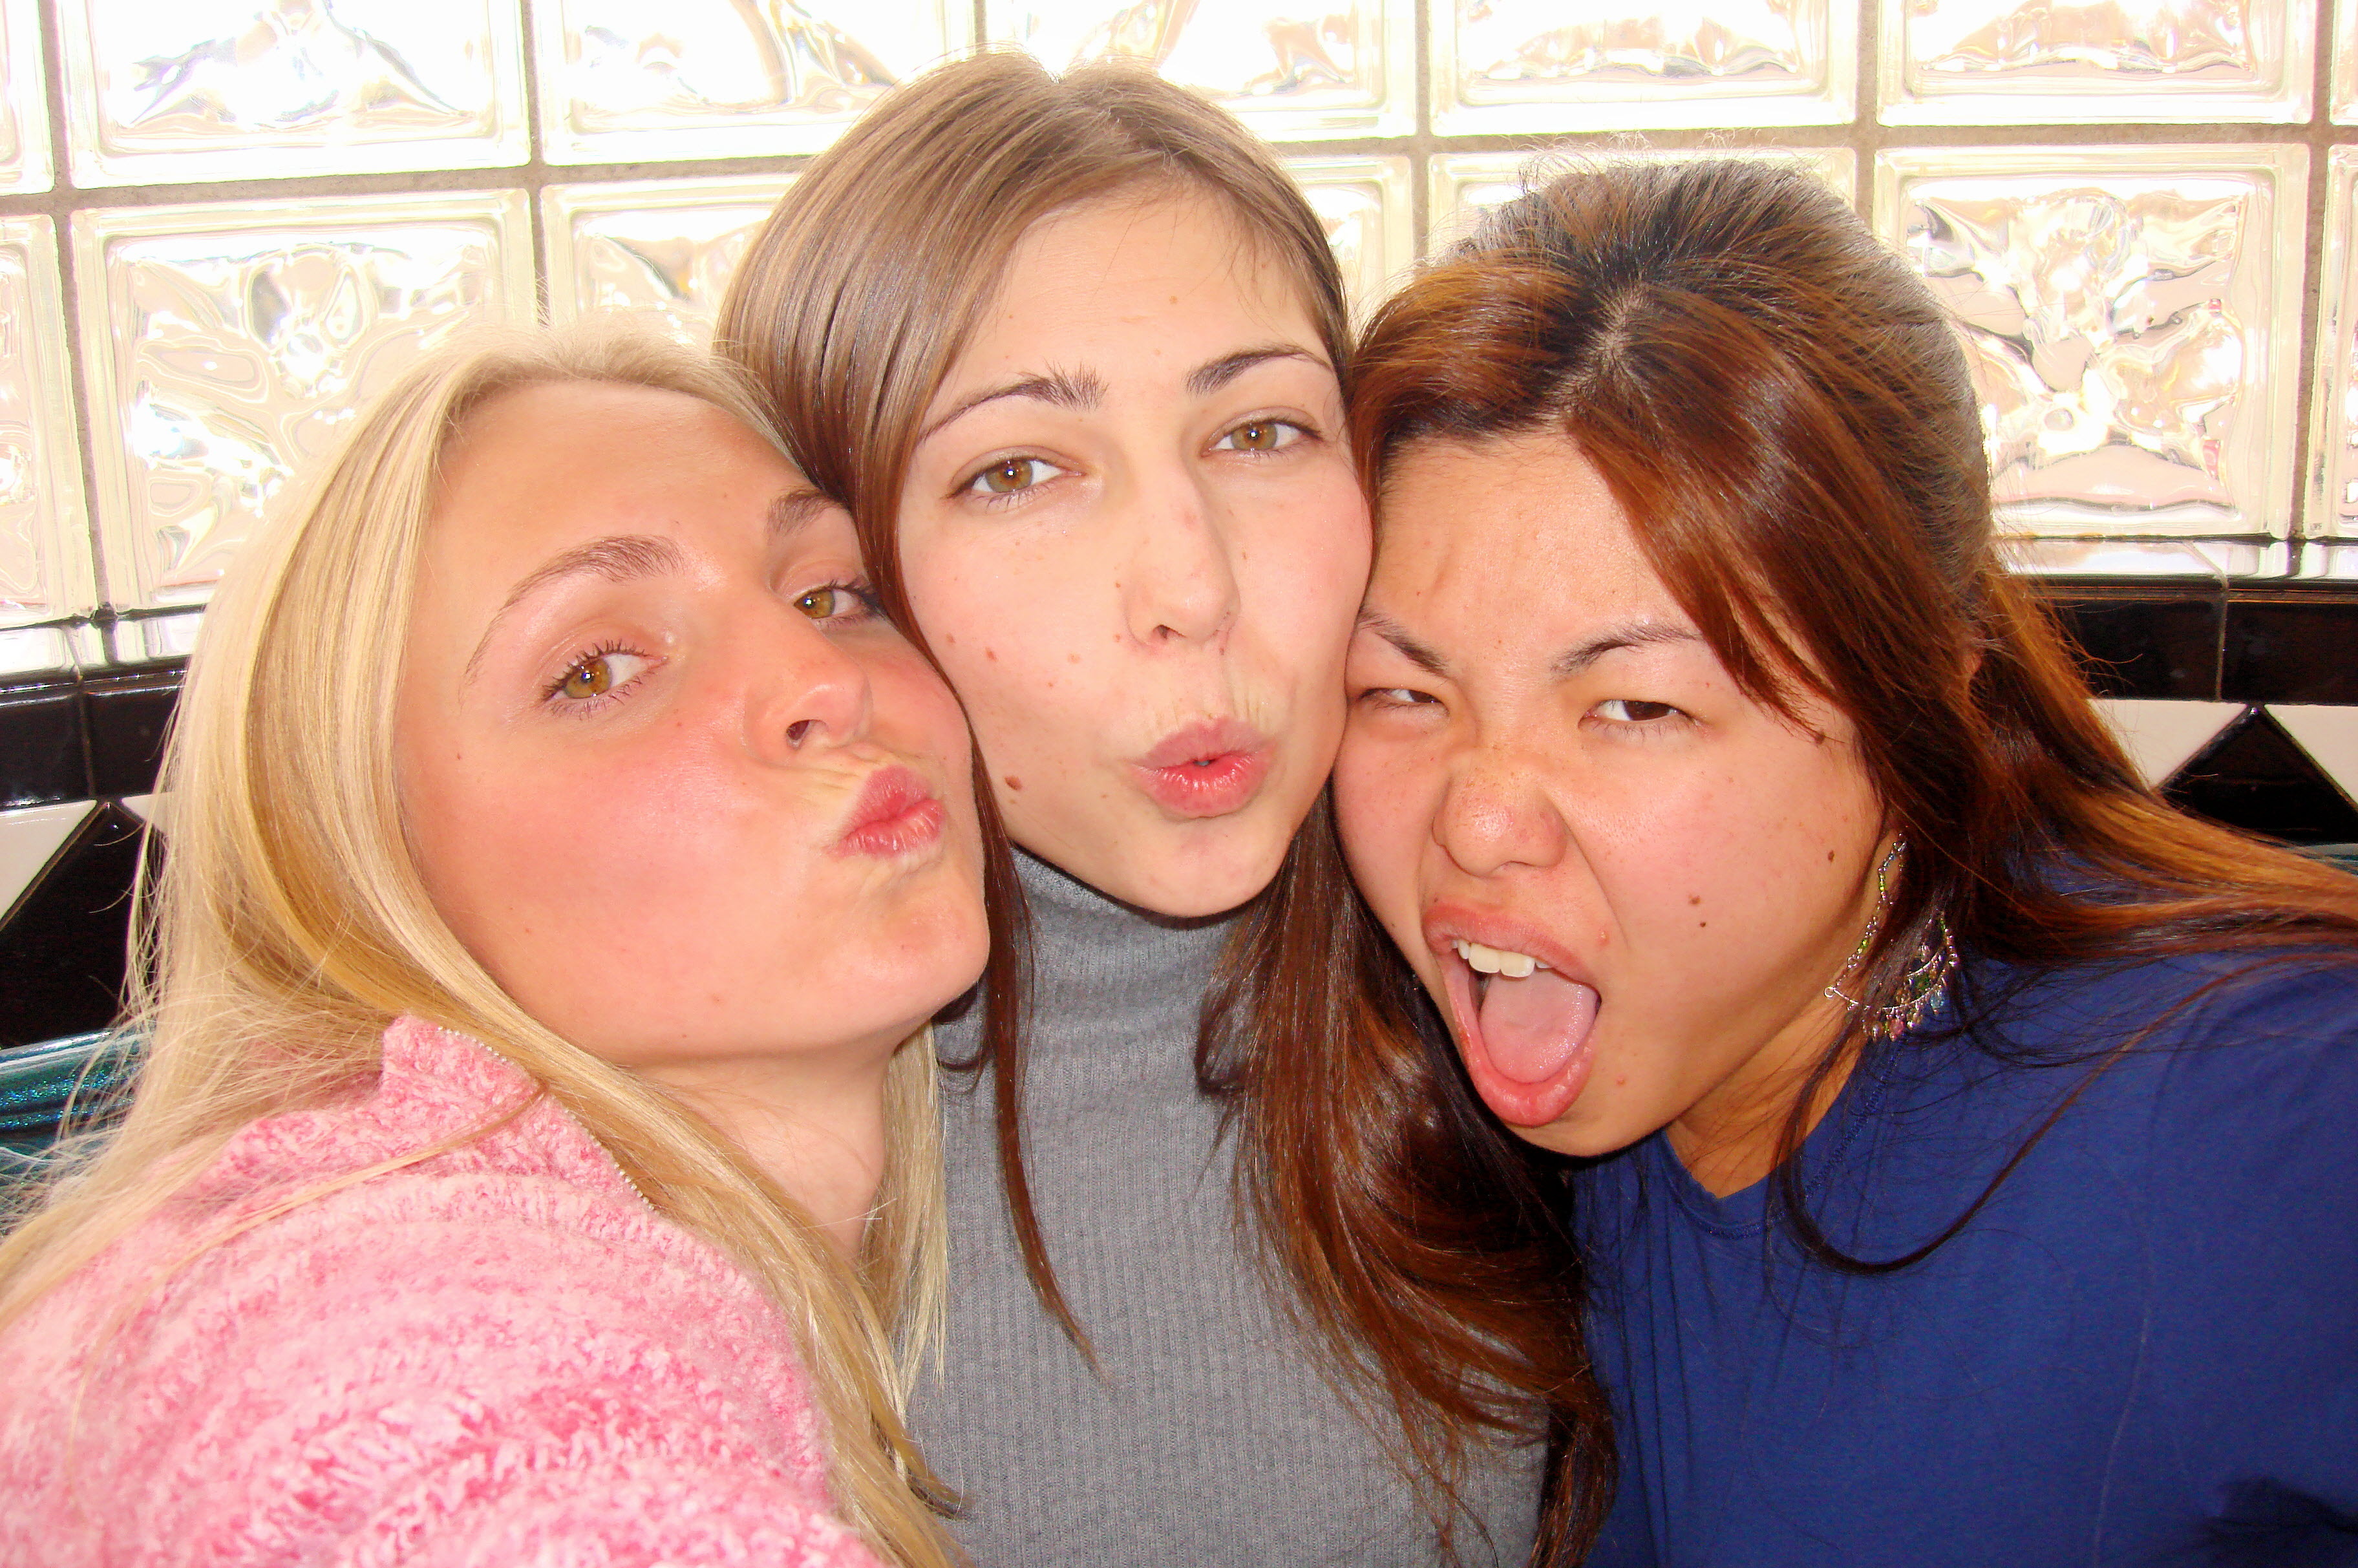 The three girl friends from 